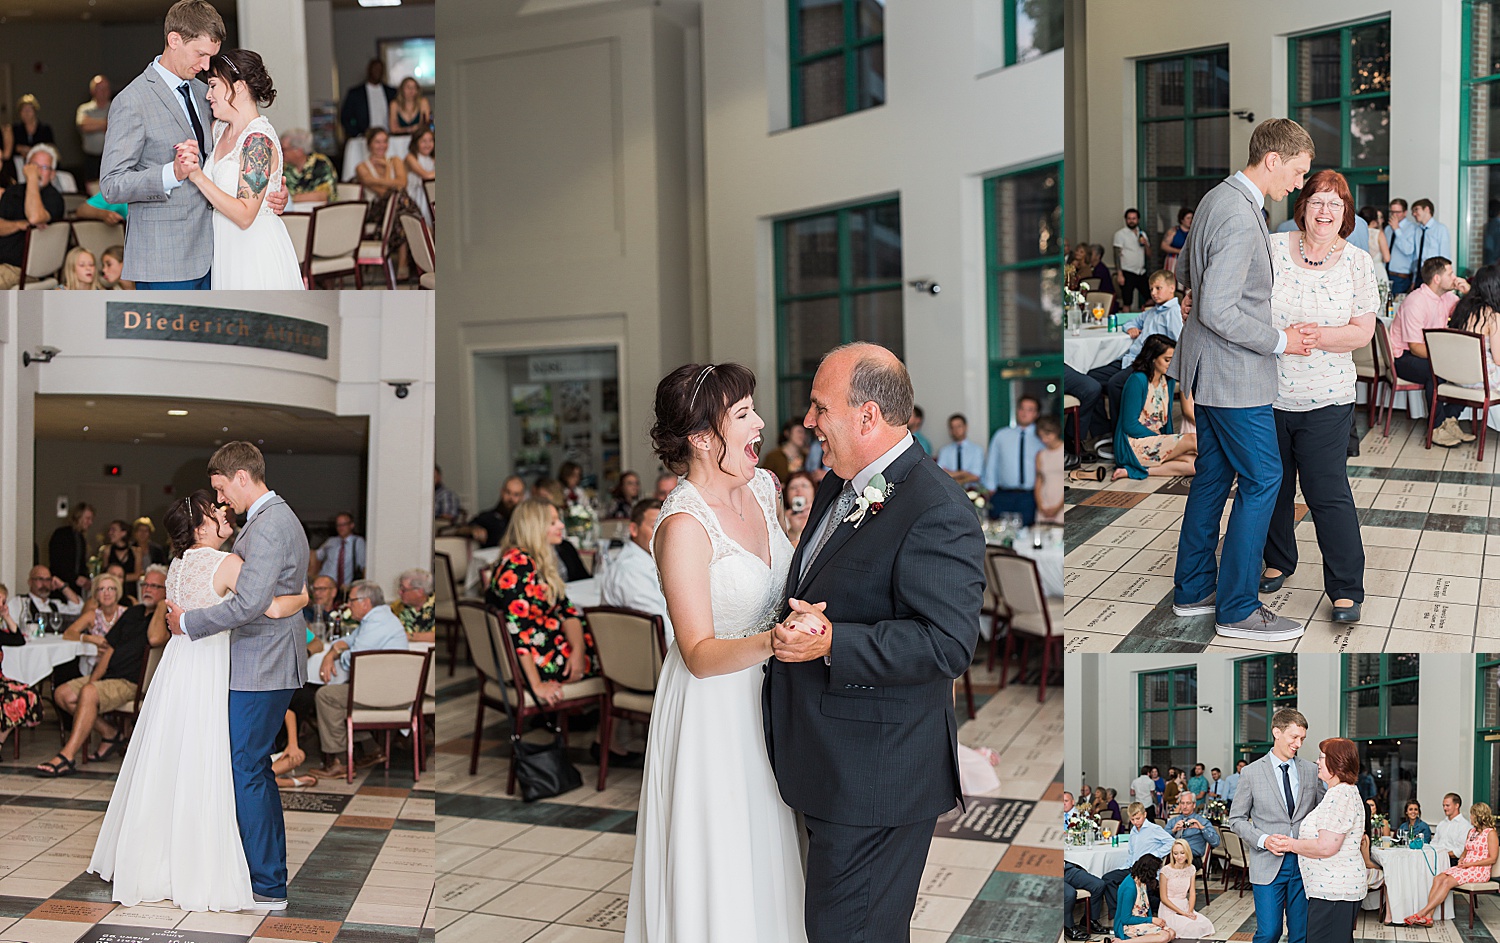 first dances with parents at reception for newly married bride and groom 